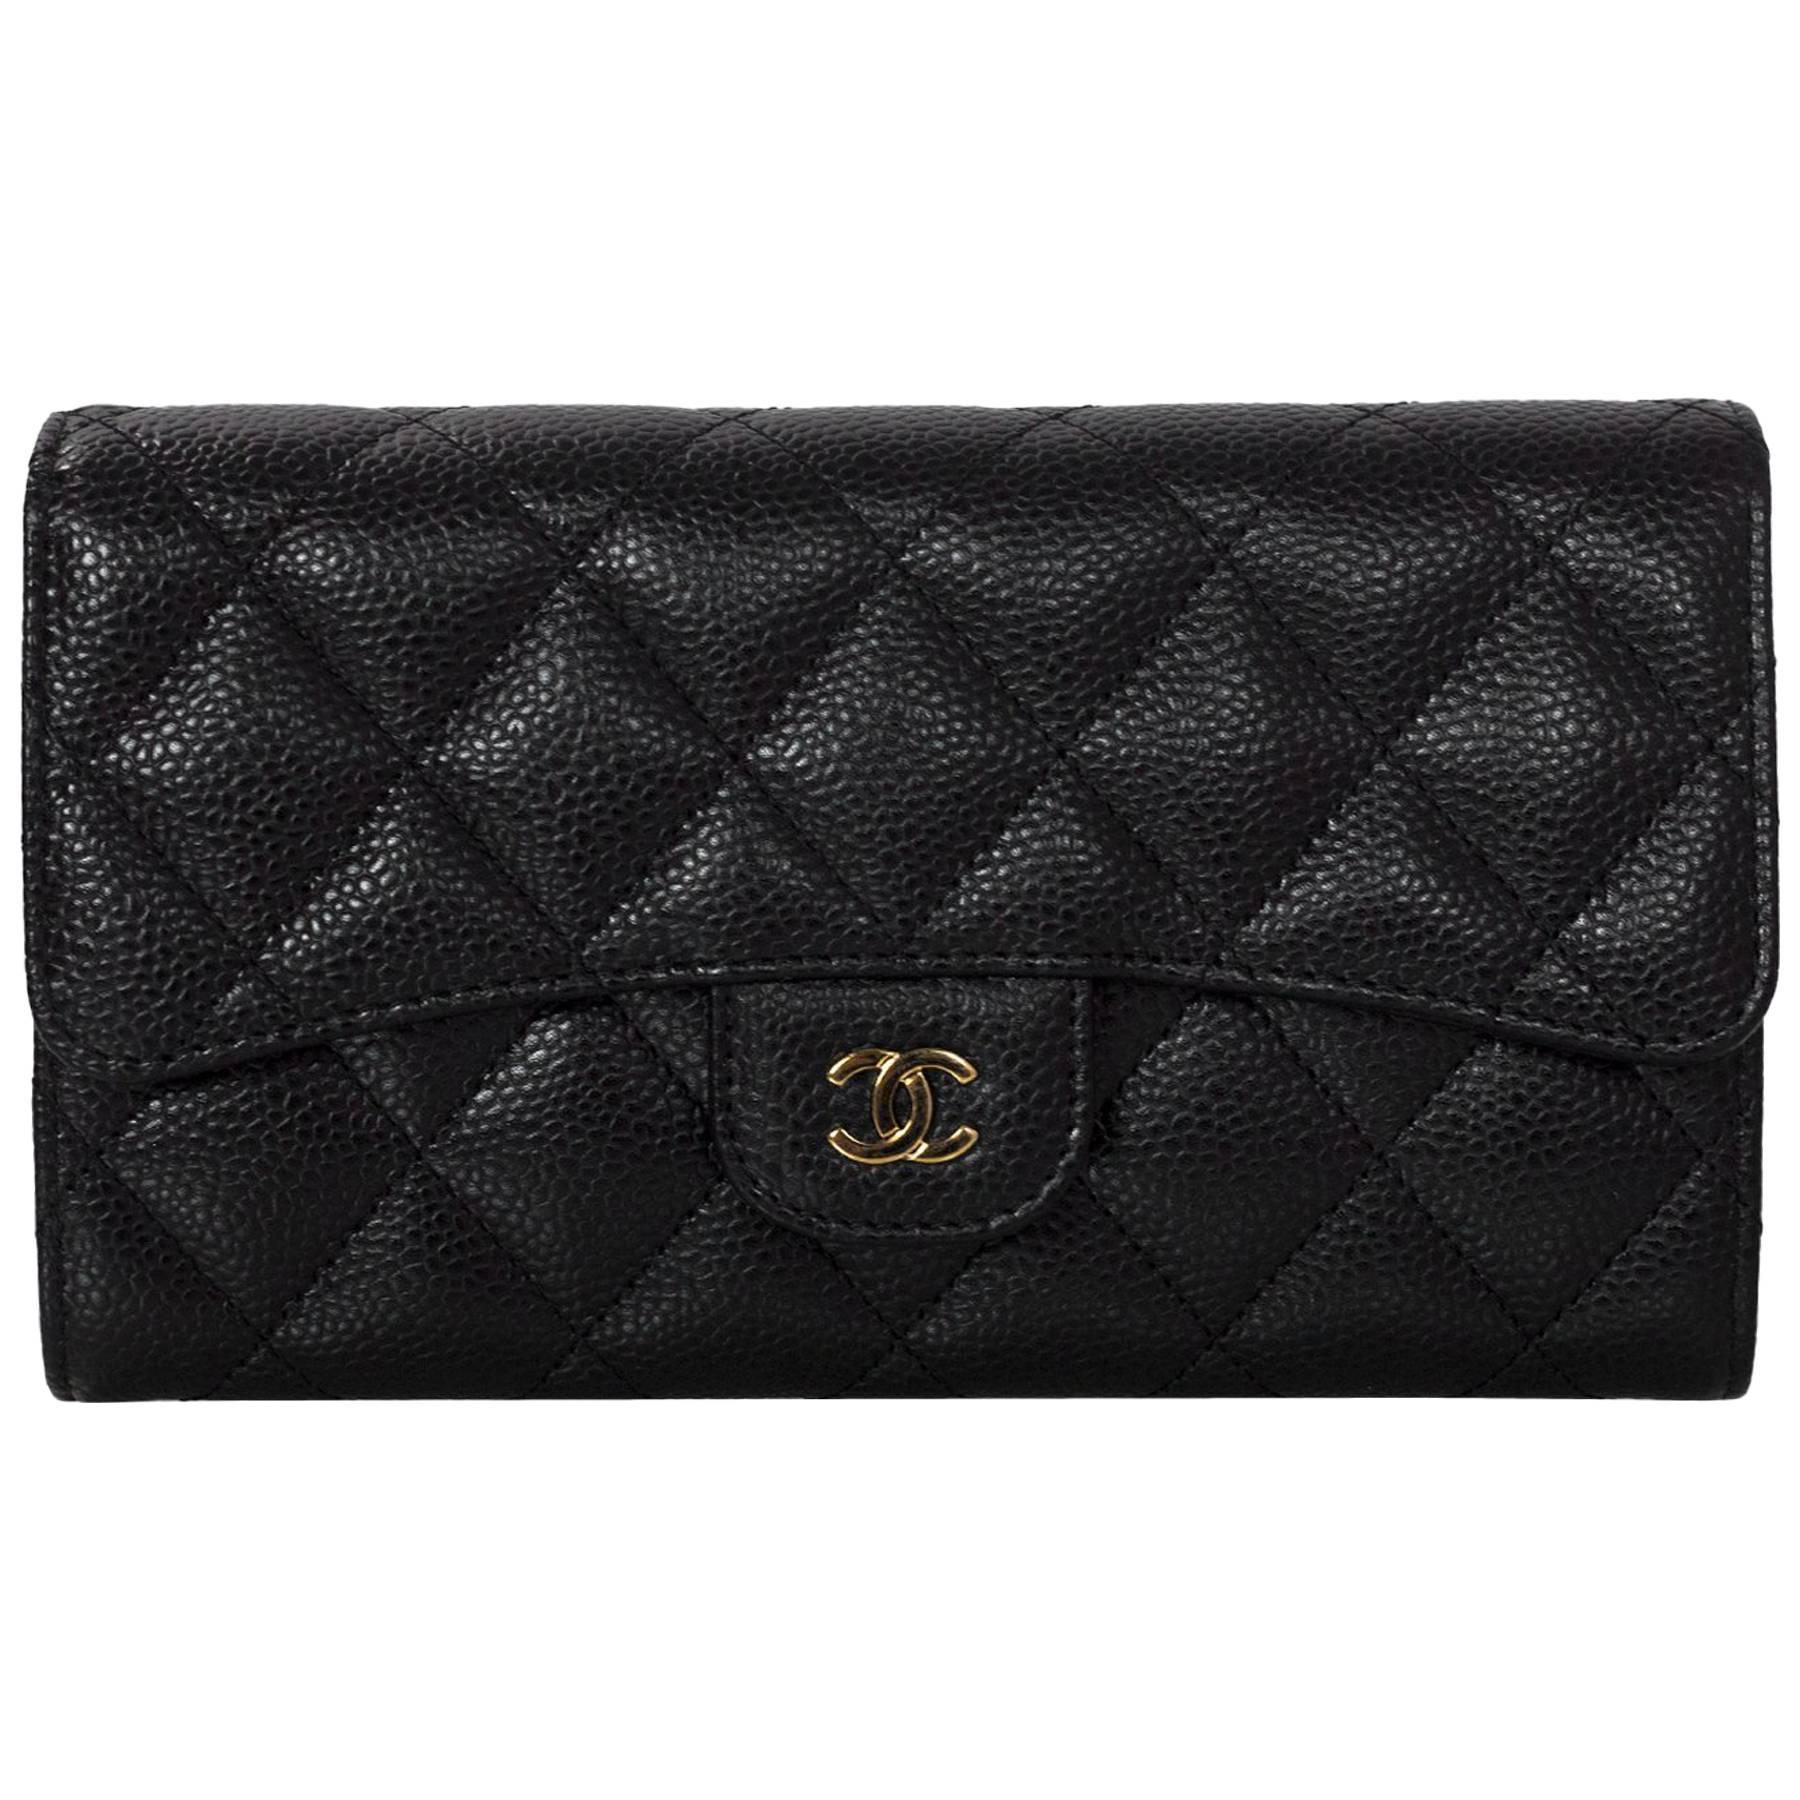 Chanel Black Caviar Leather Quilted Large Flap Wallet with Box & Dust Bag